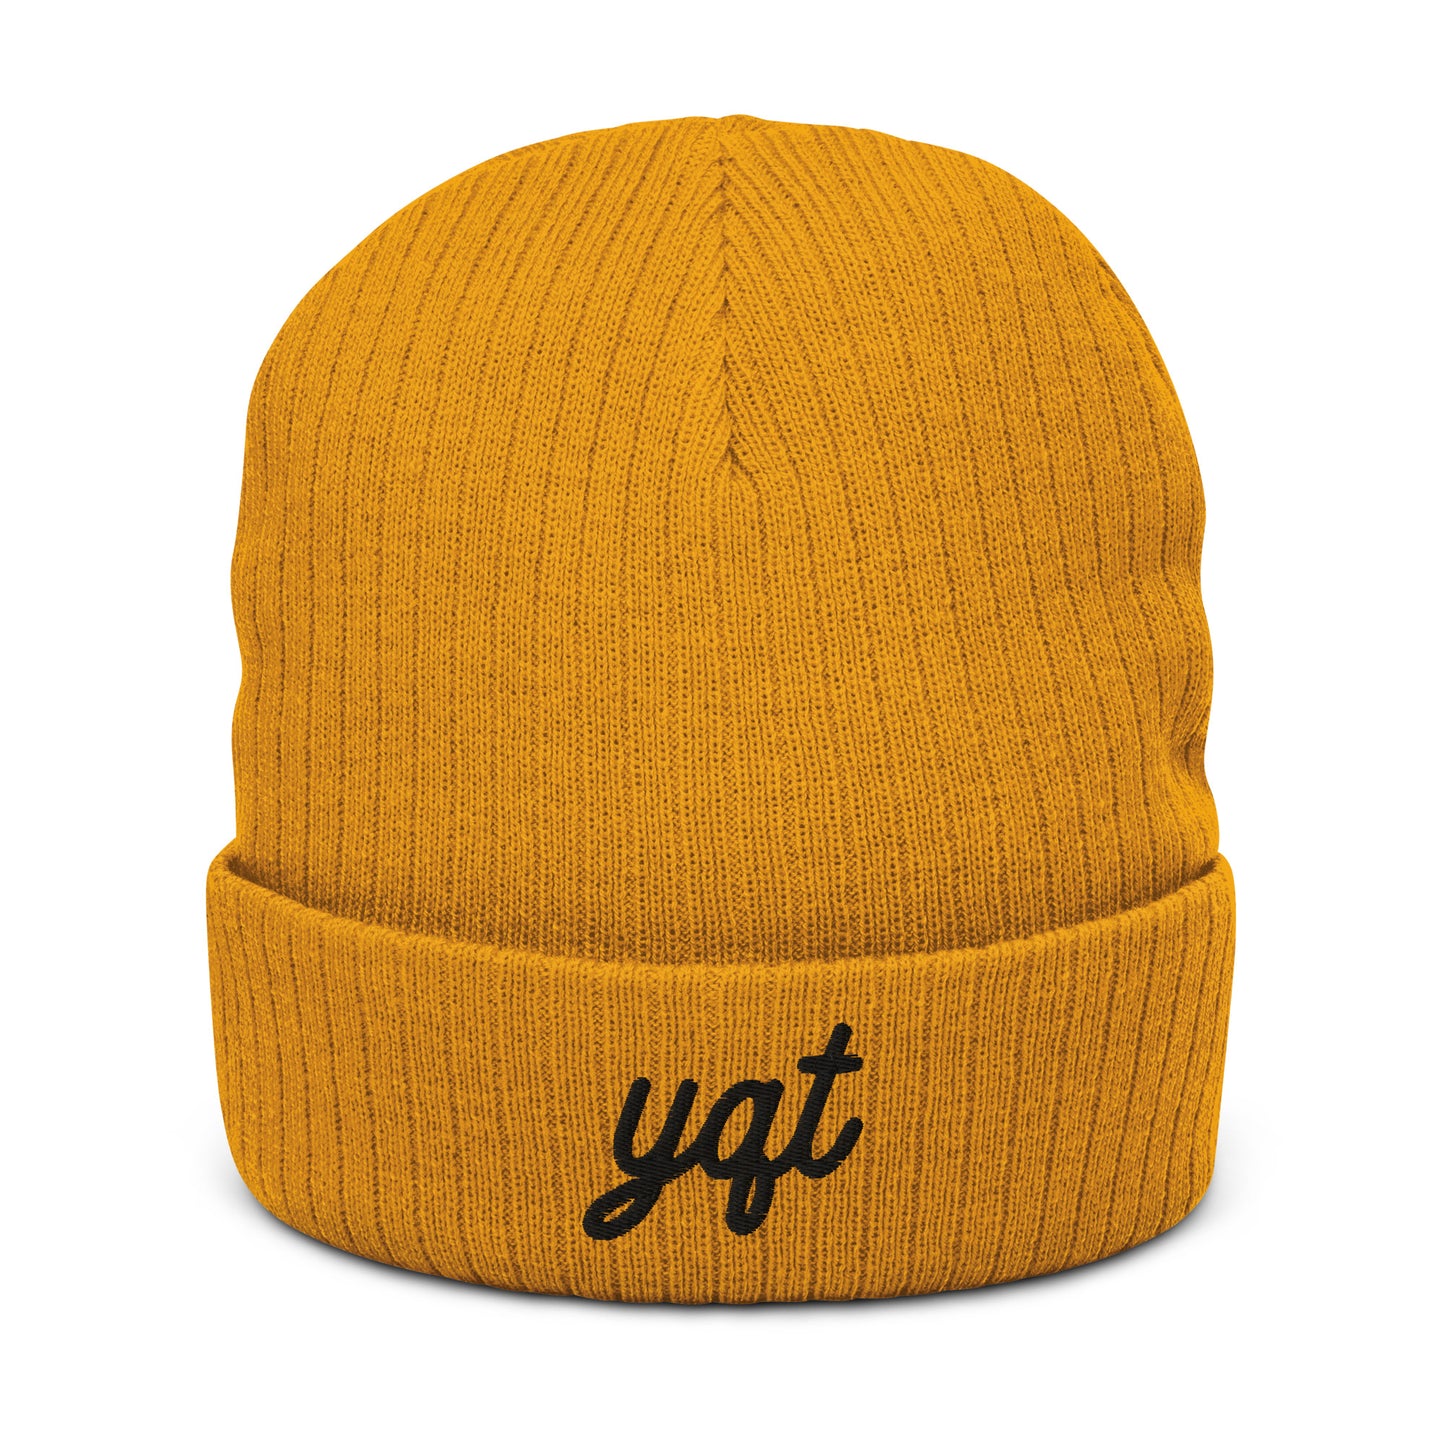 Vintage Script Recycled Cuffed Beanie • YQT Thunder Bay • YHM Designs - Image 02